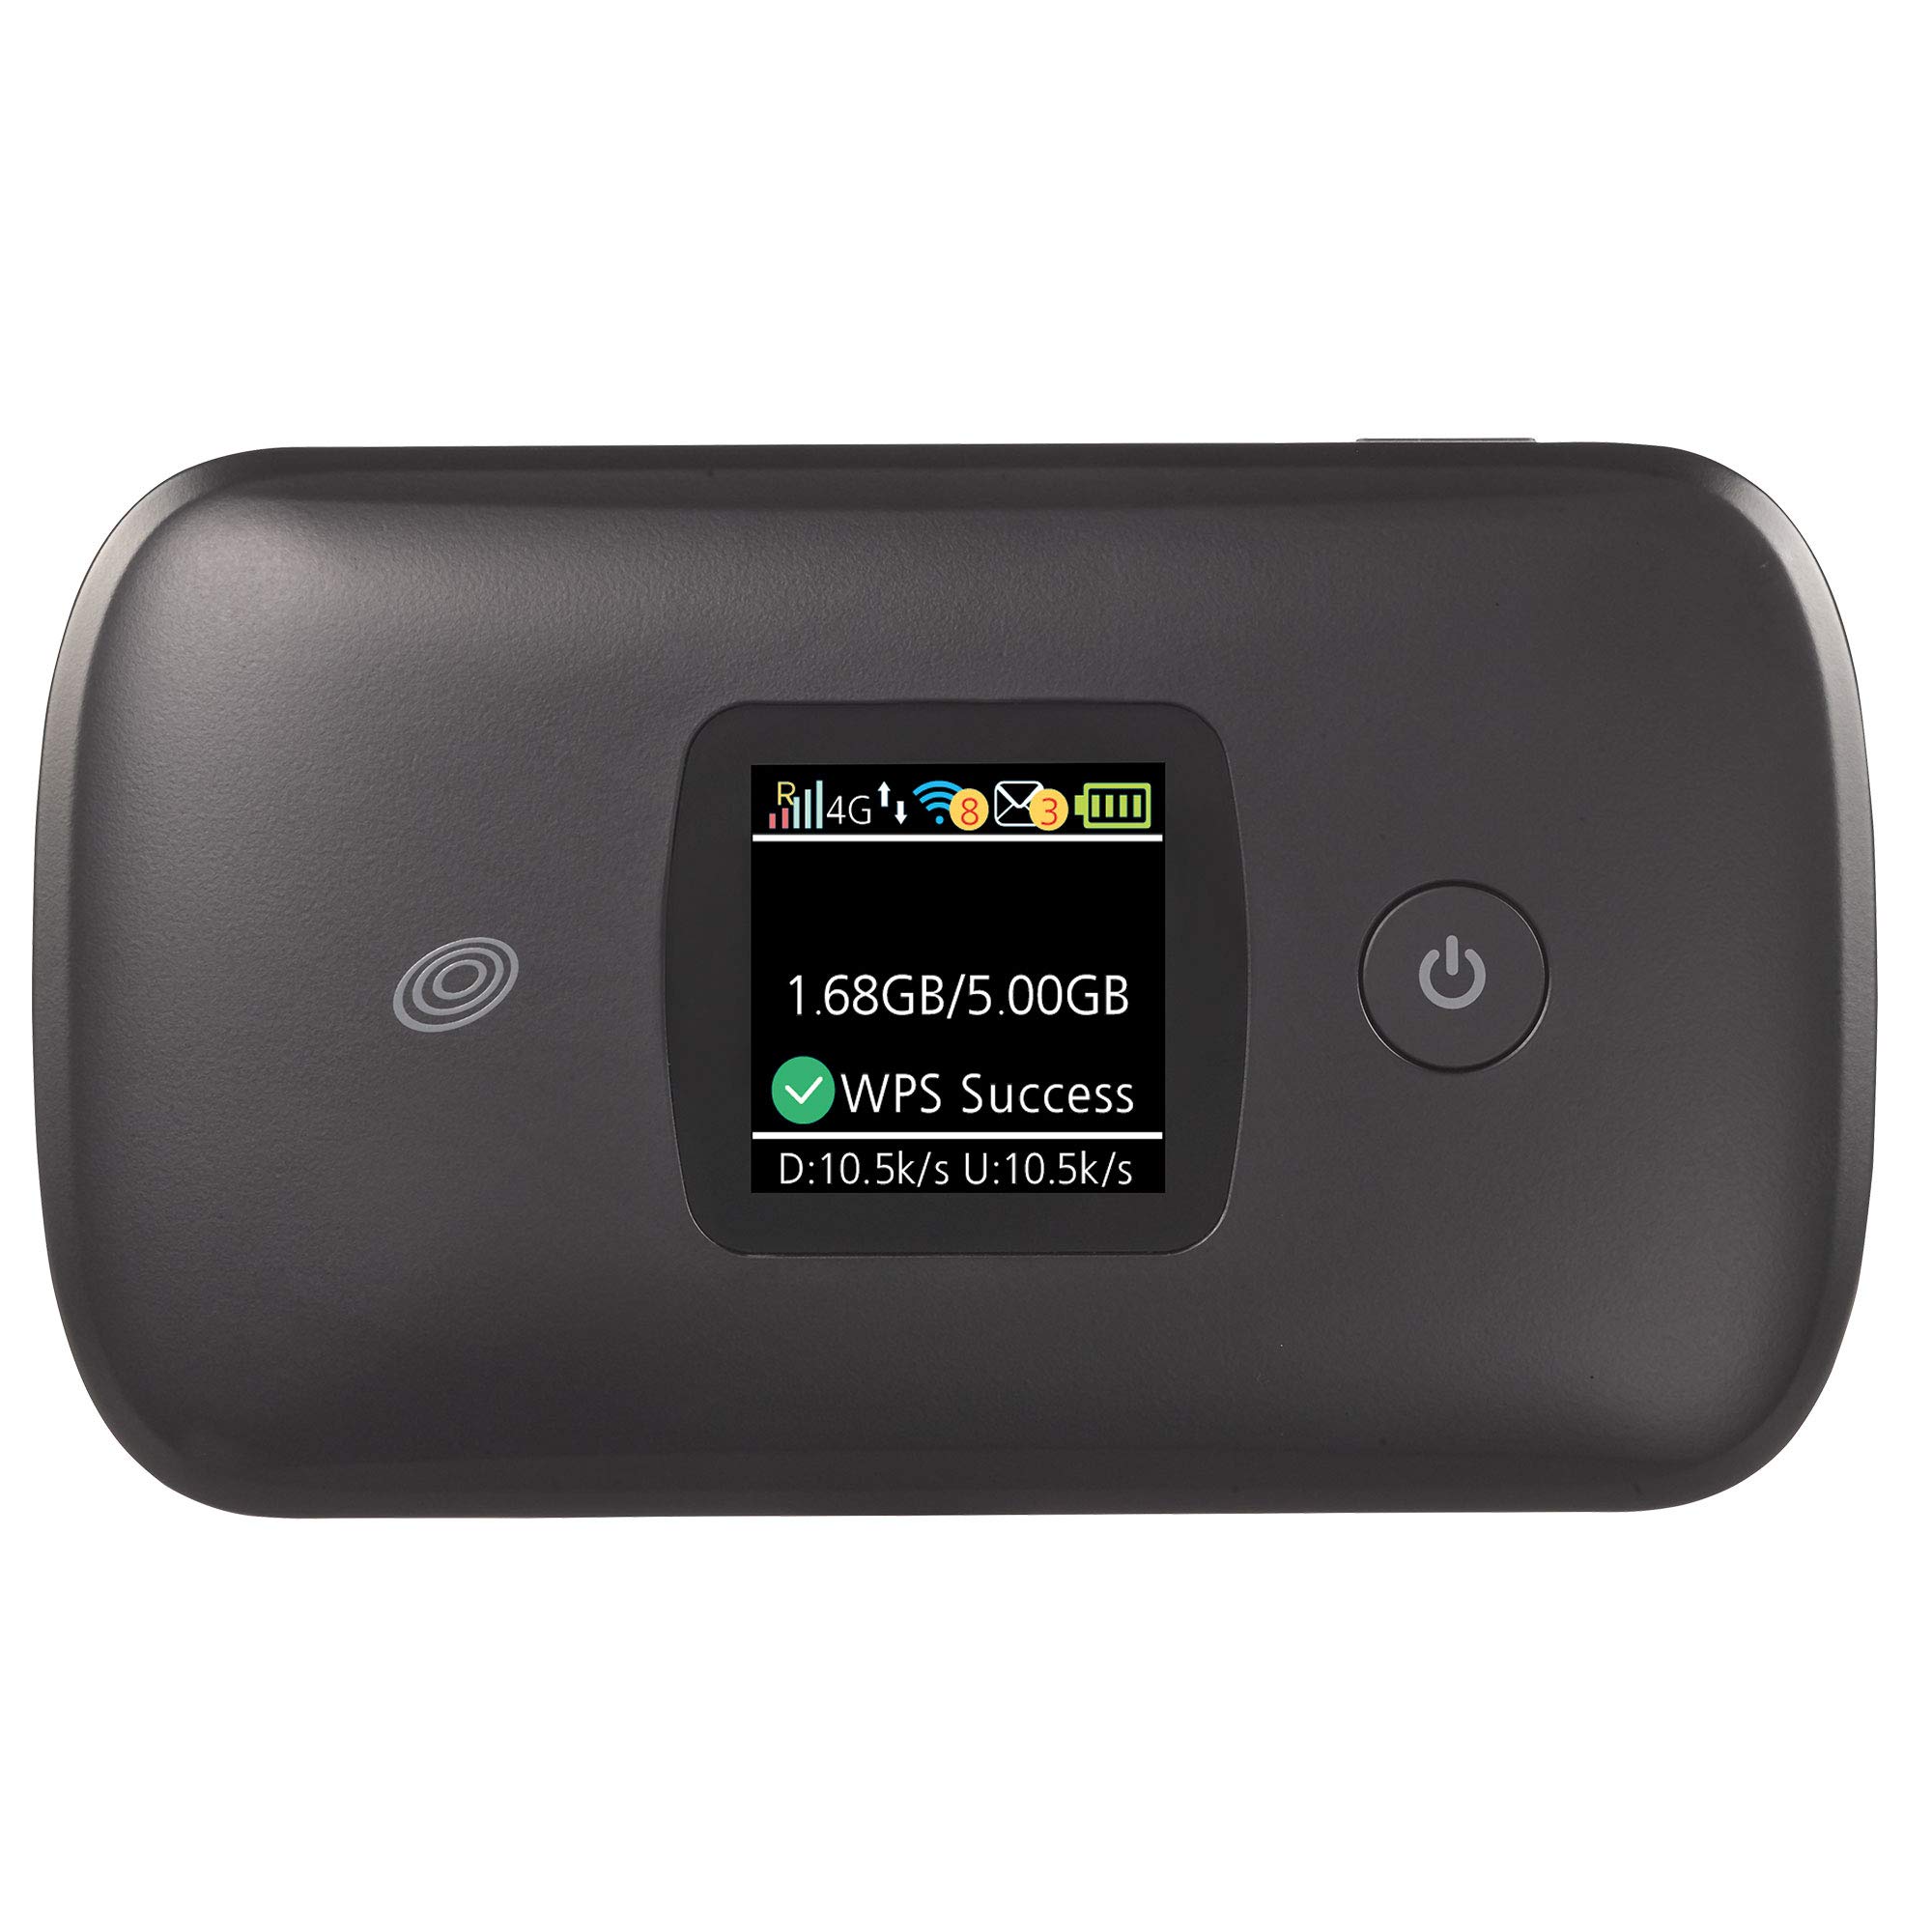 SIMPLE Mobile Moxee, 4G LTE, 256MB, Sim Card Included, Black - Prepaid Mobile Hotspot (Locked) -